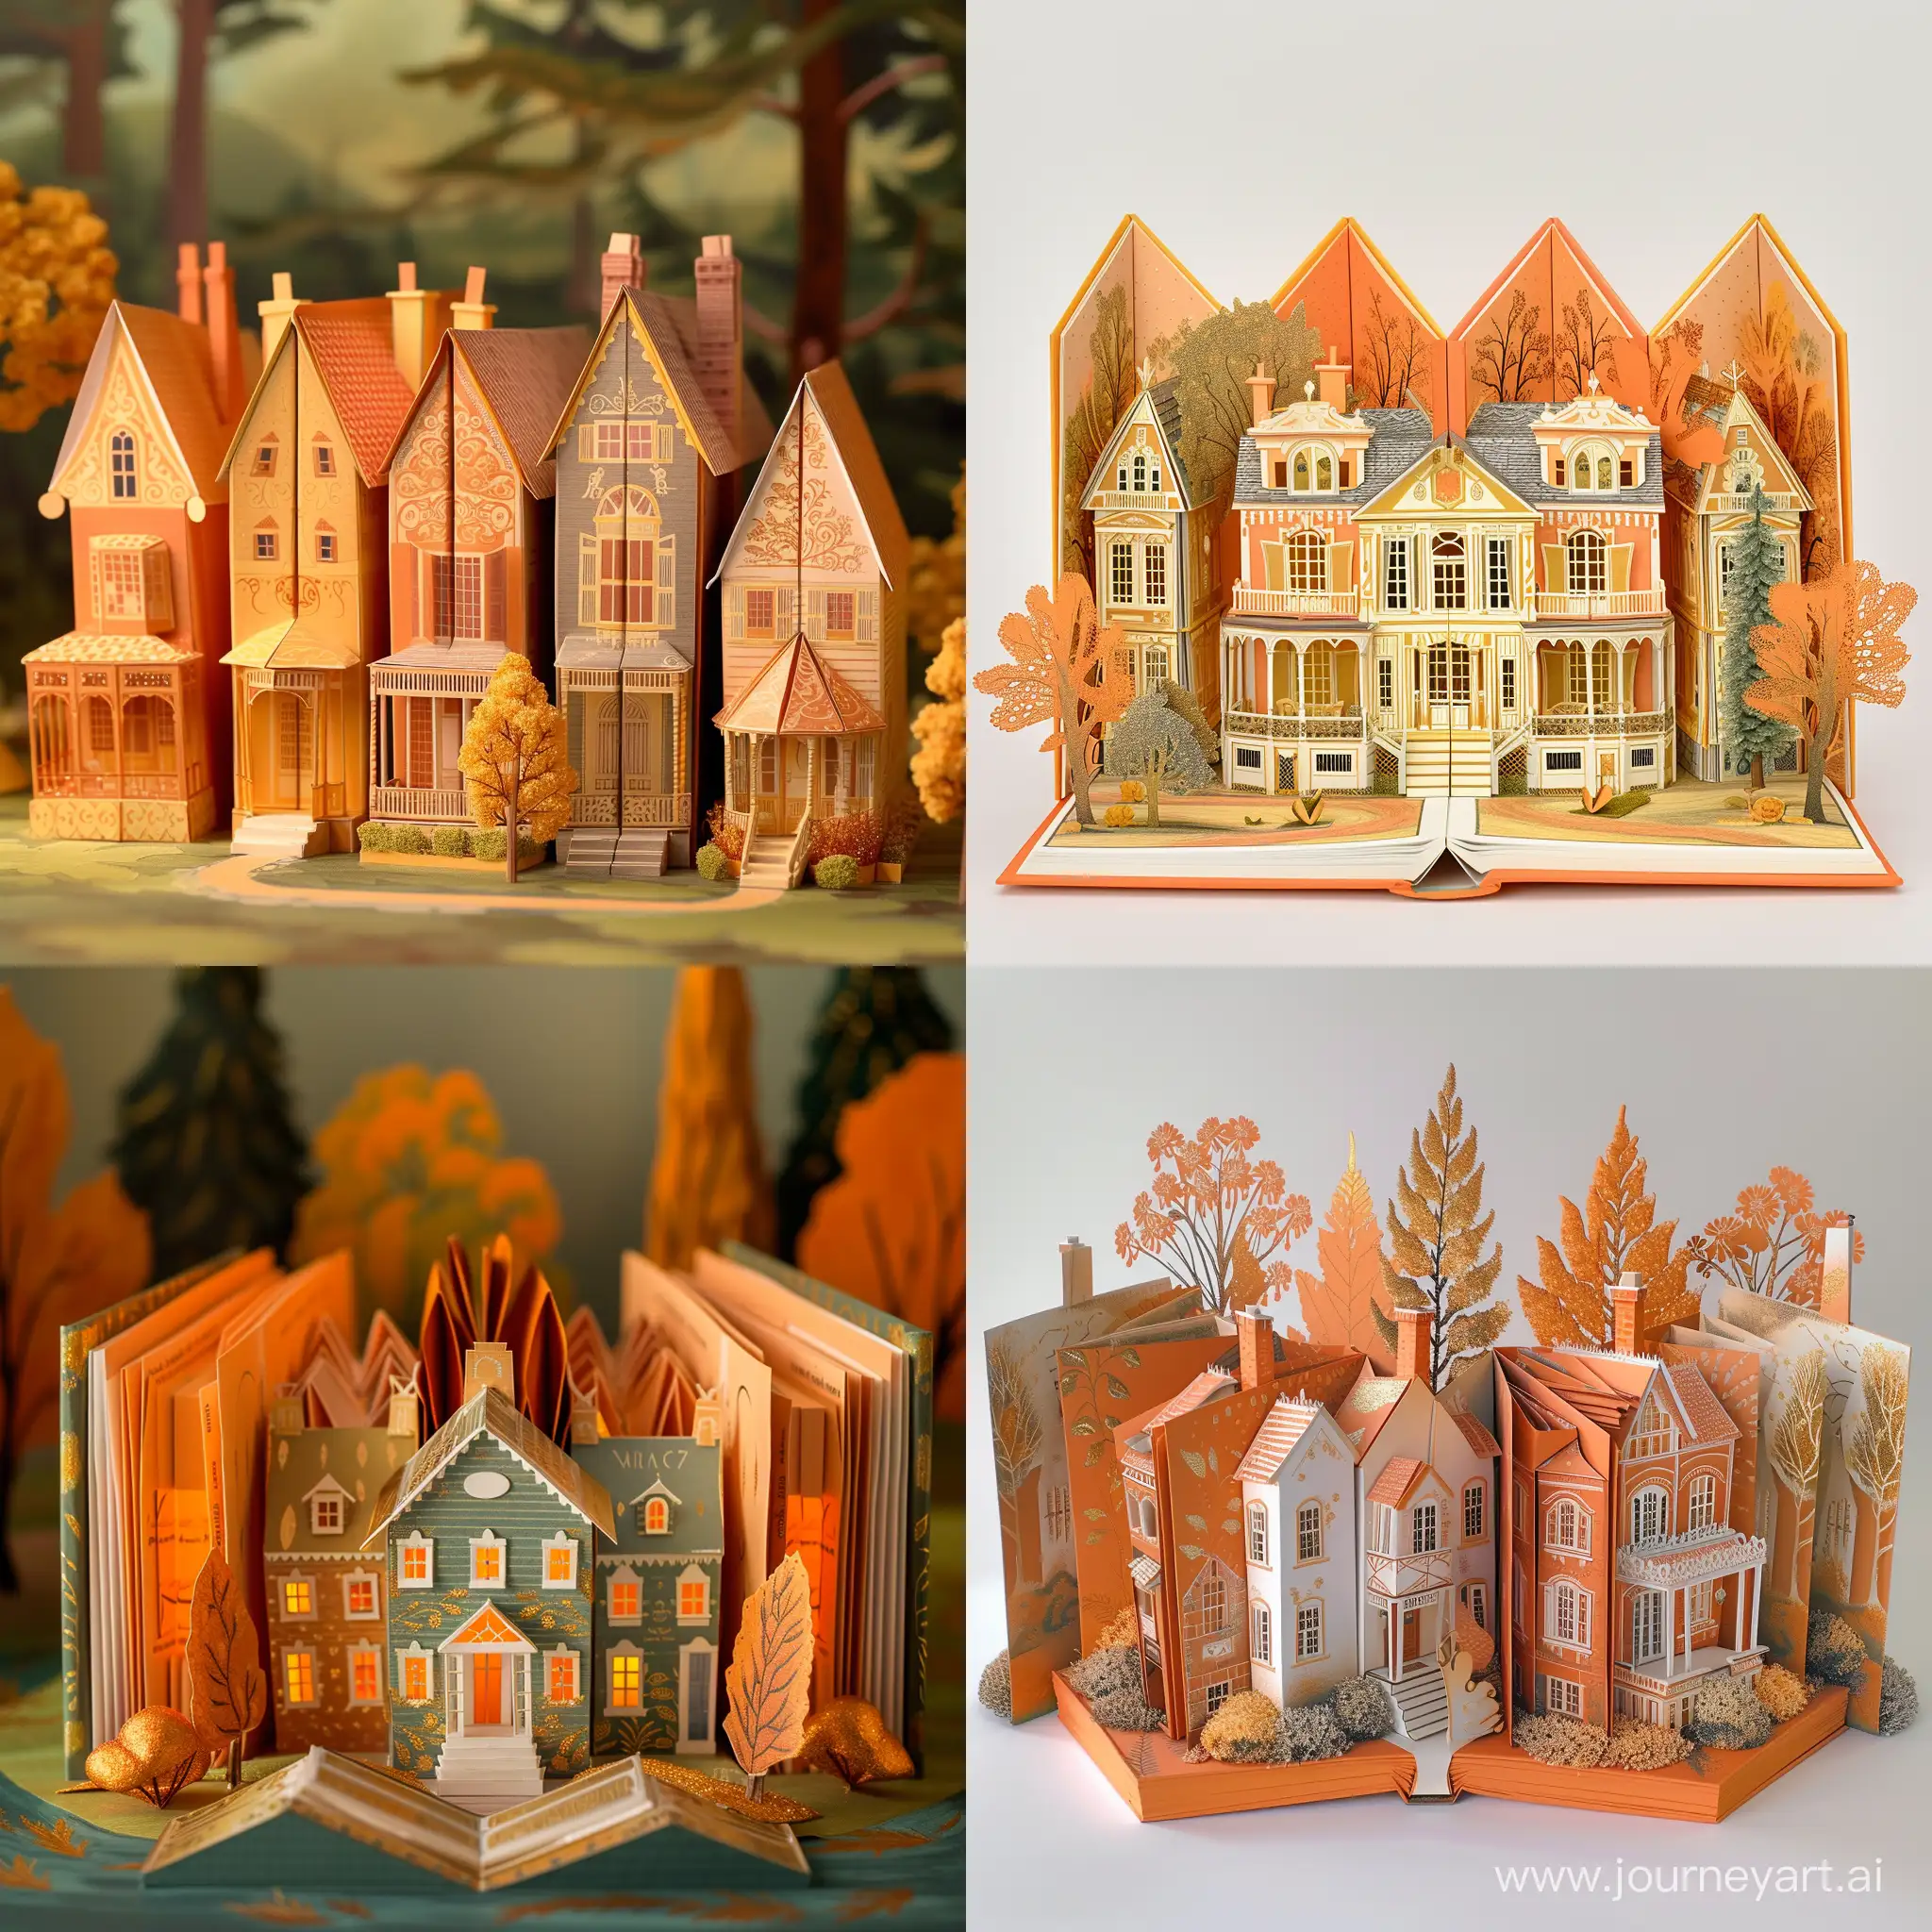 VictorianStyle-Paper-Book-Houses-March-Family-Estate-Diorama